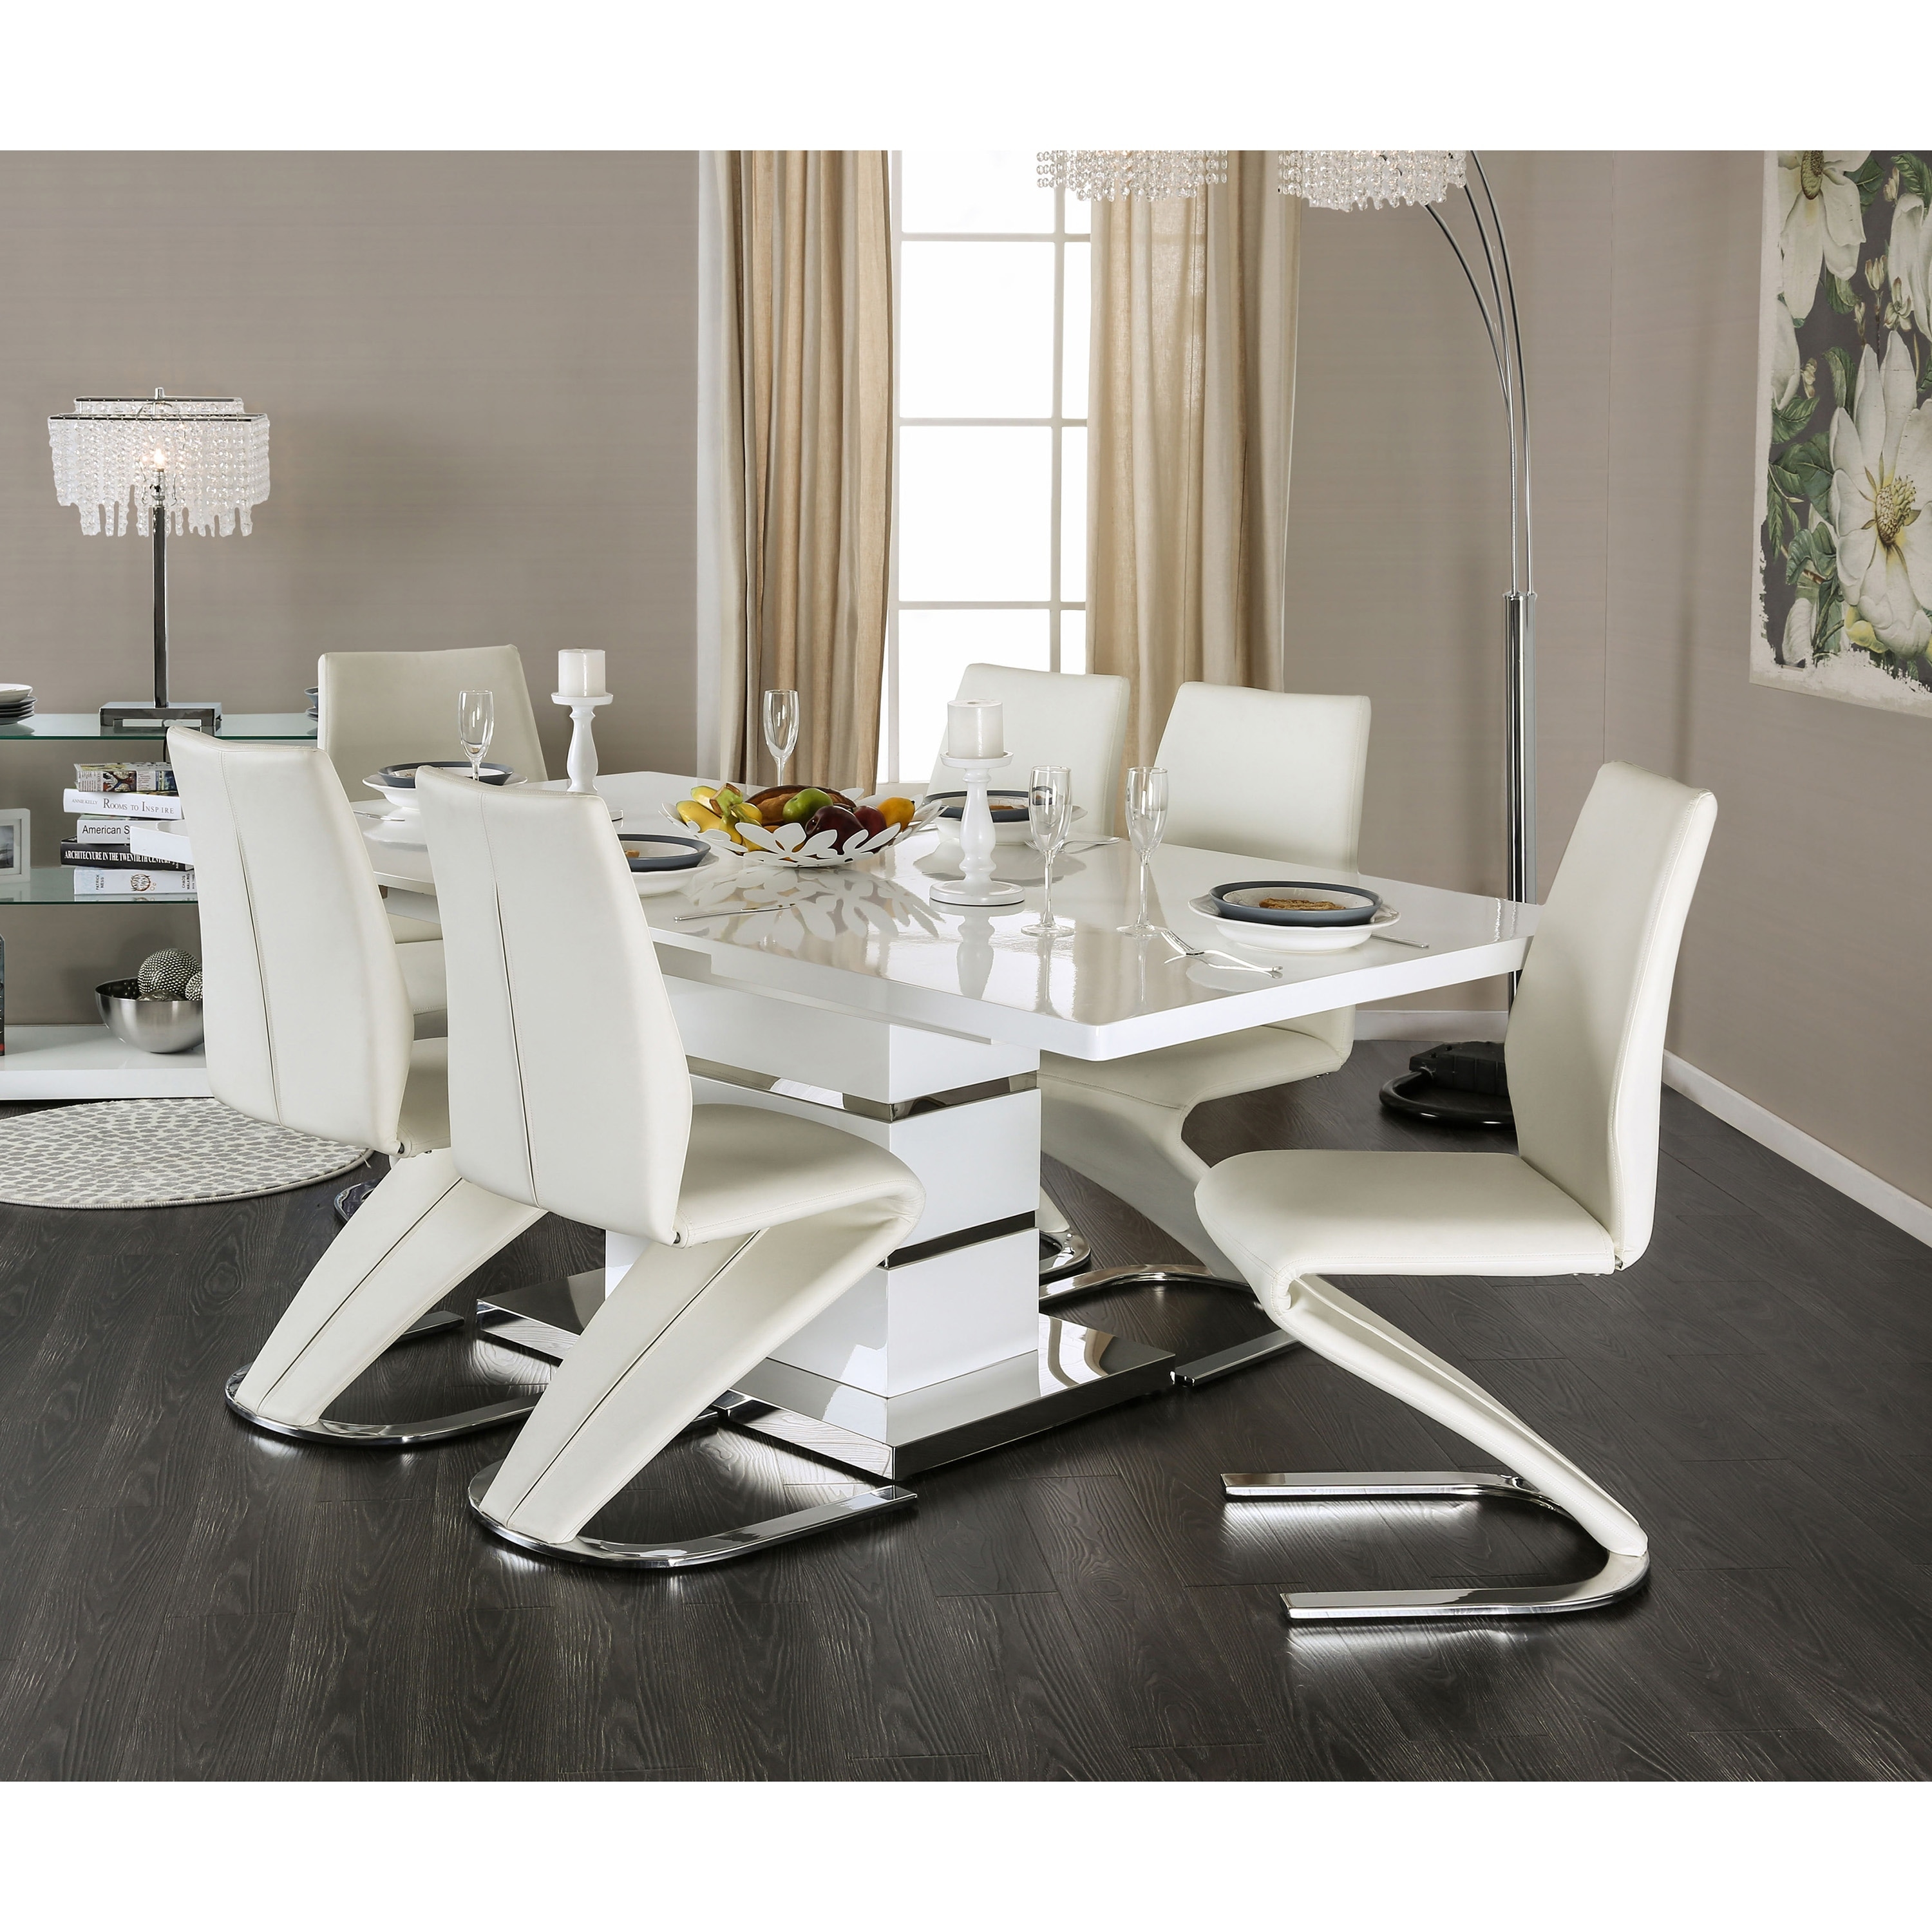 furniture of america vorr contemporary white 7piece dining table set